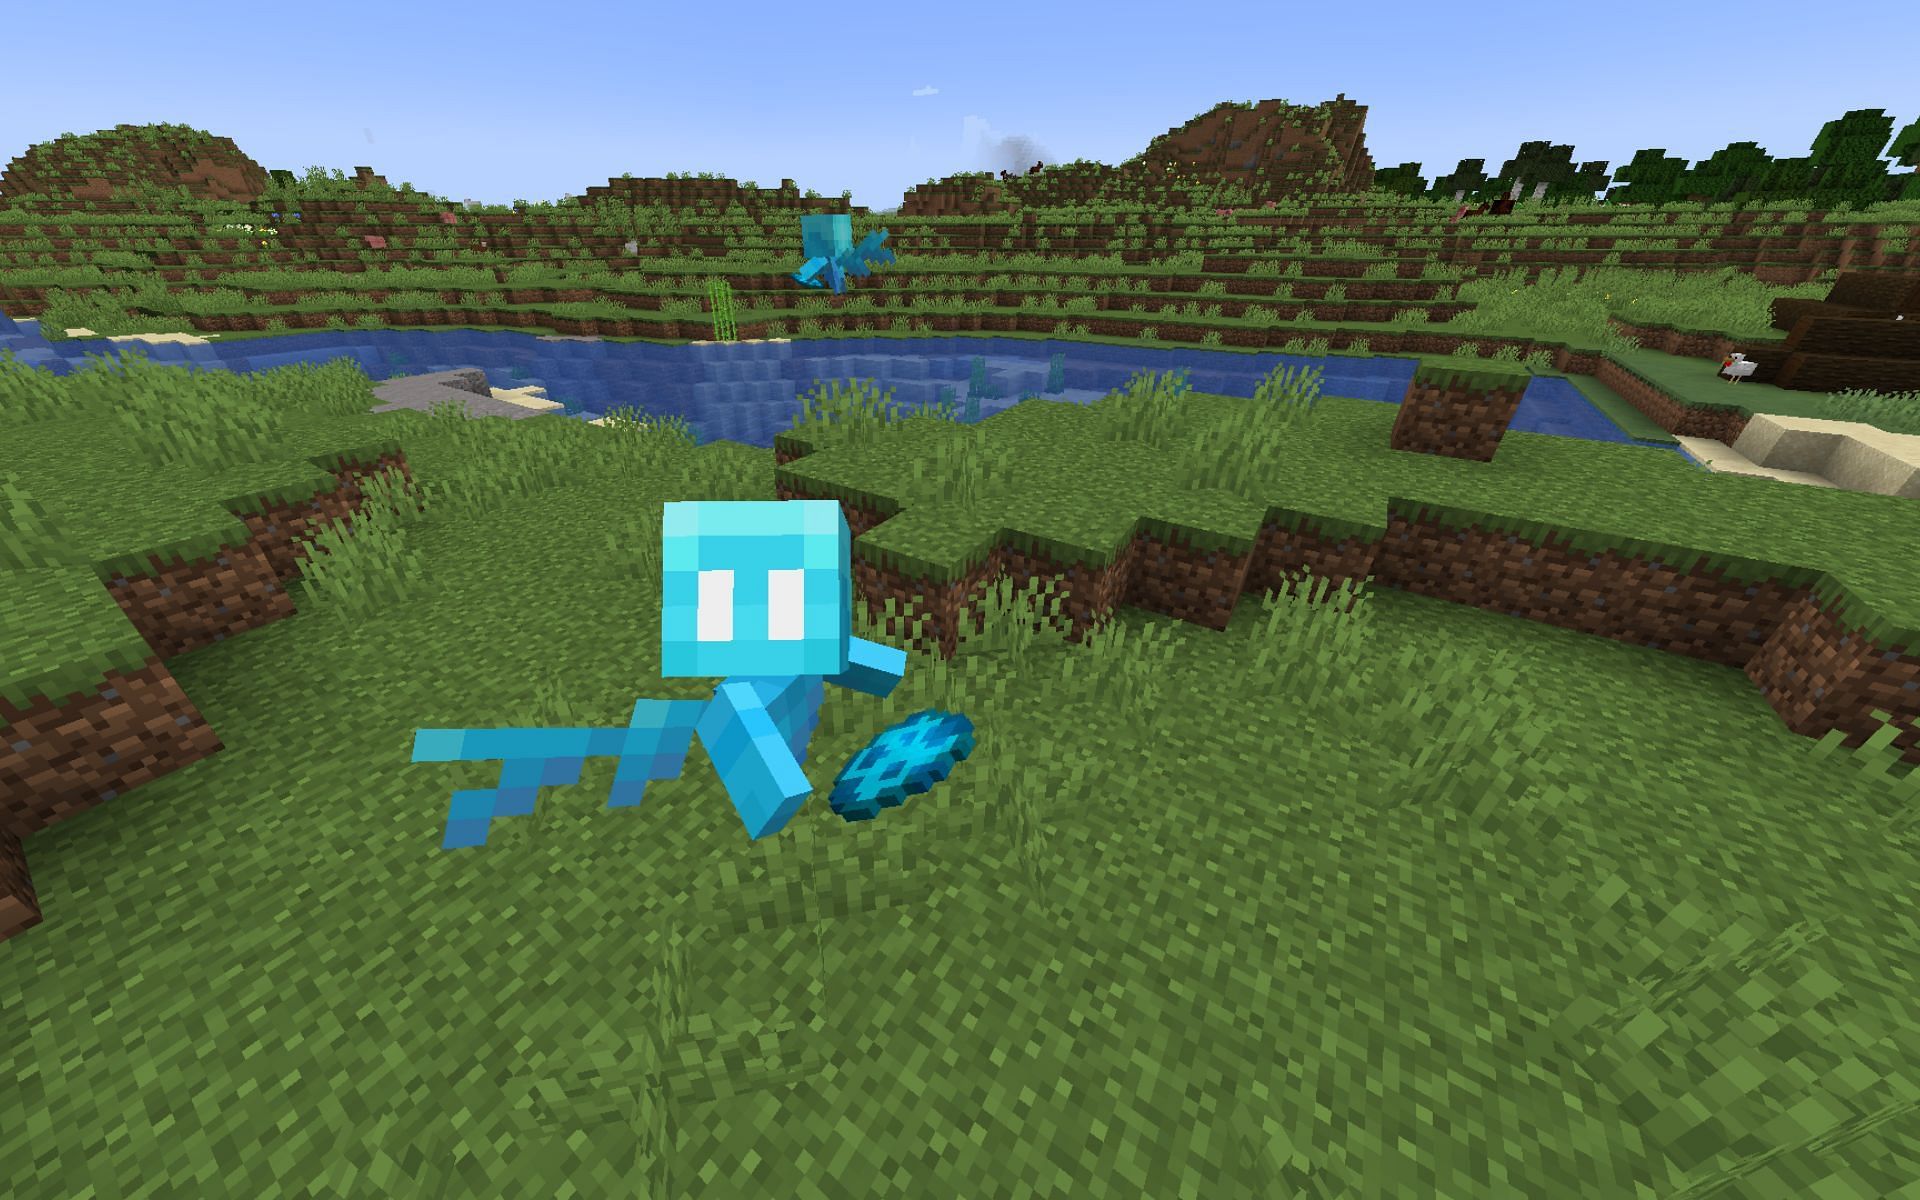 Allays were an instant hit in the Minecraft community when they were announced for the game (Image via Mojang)